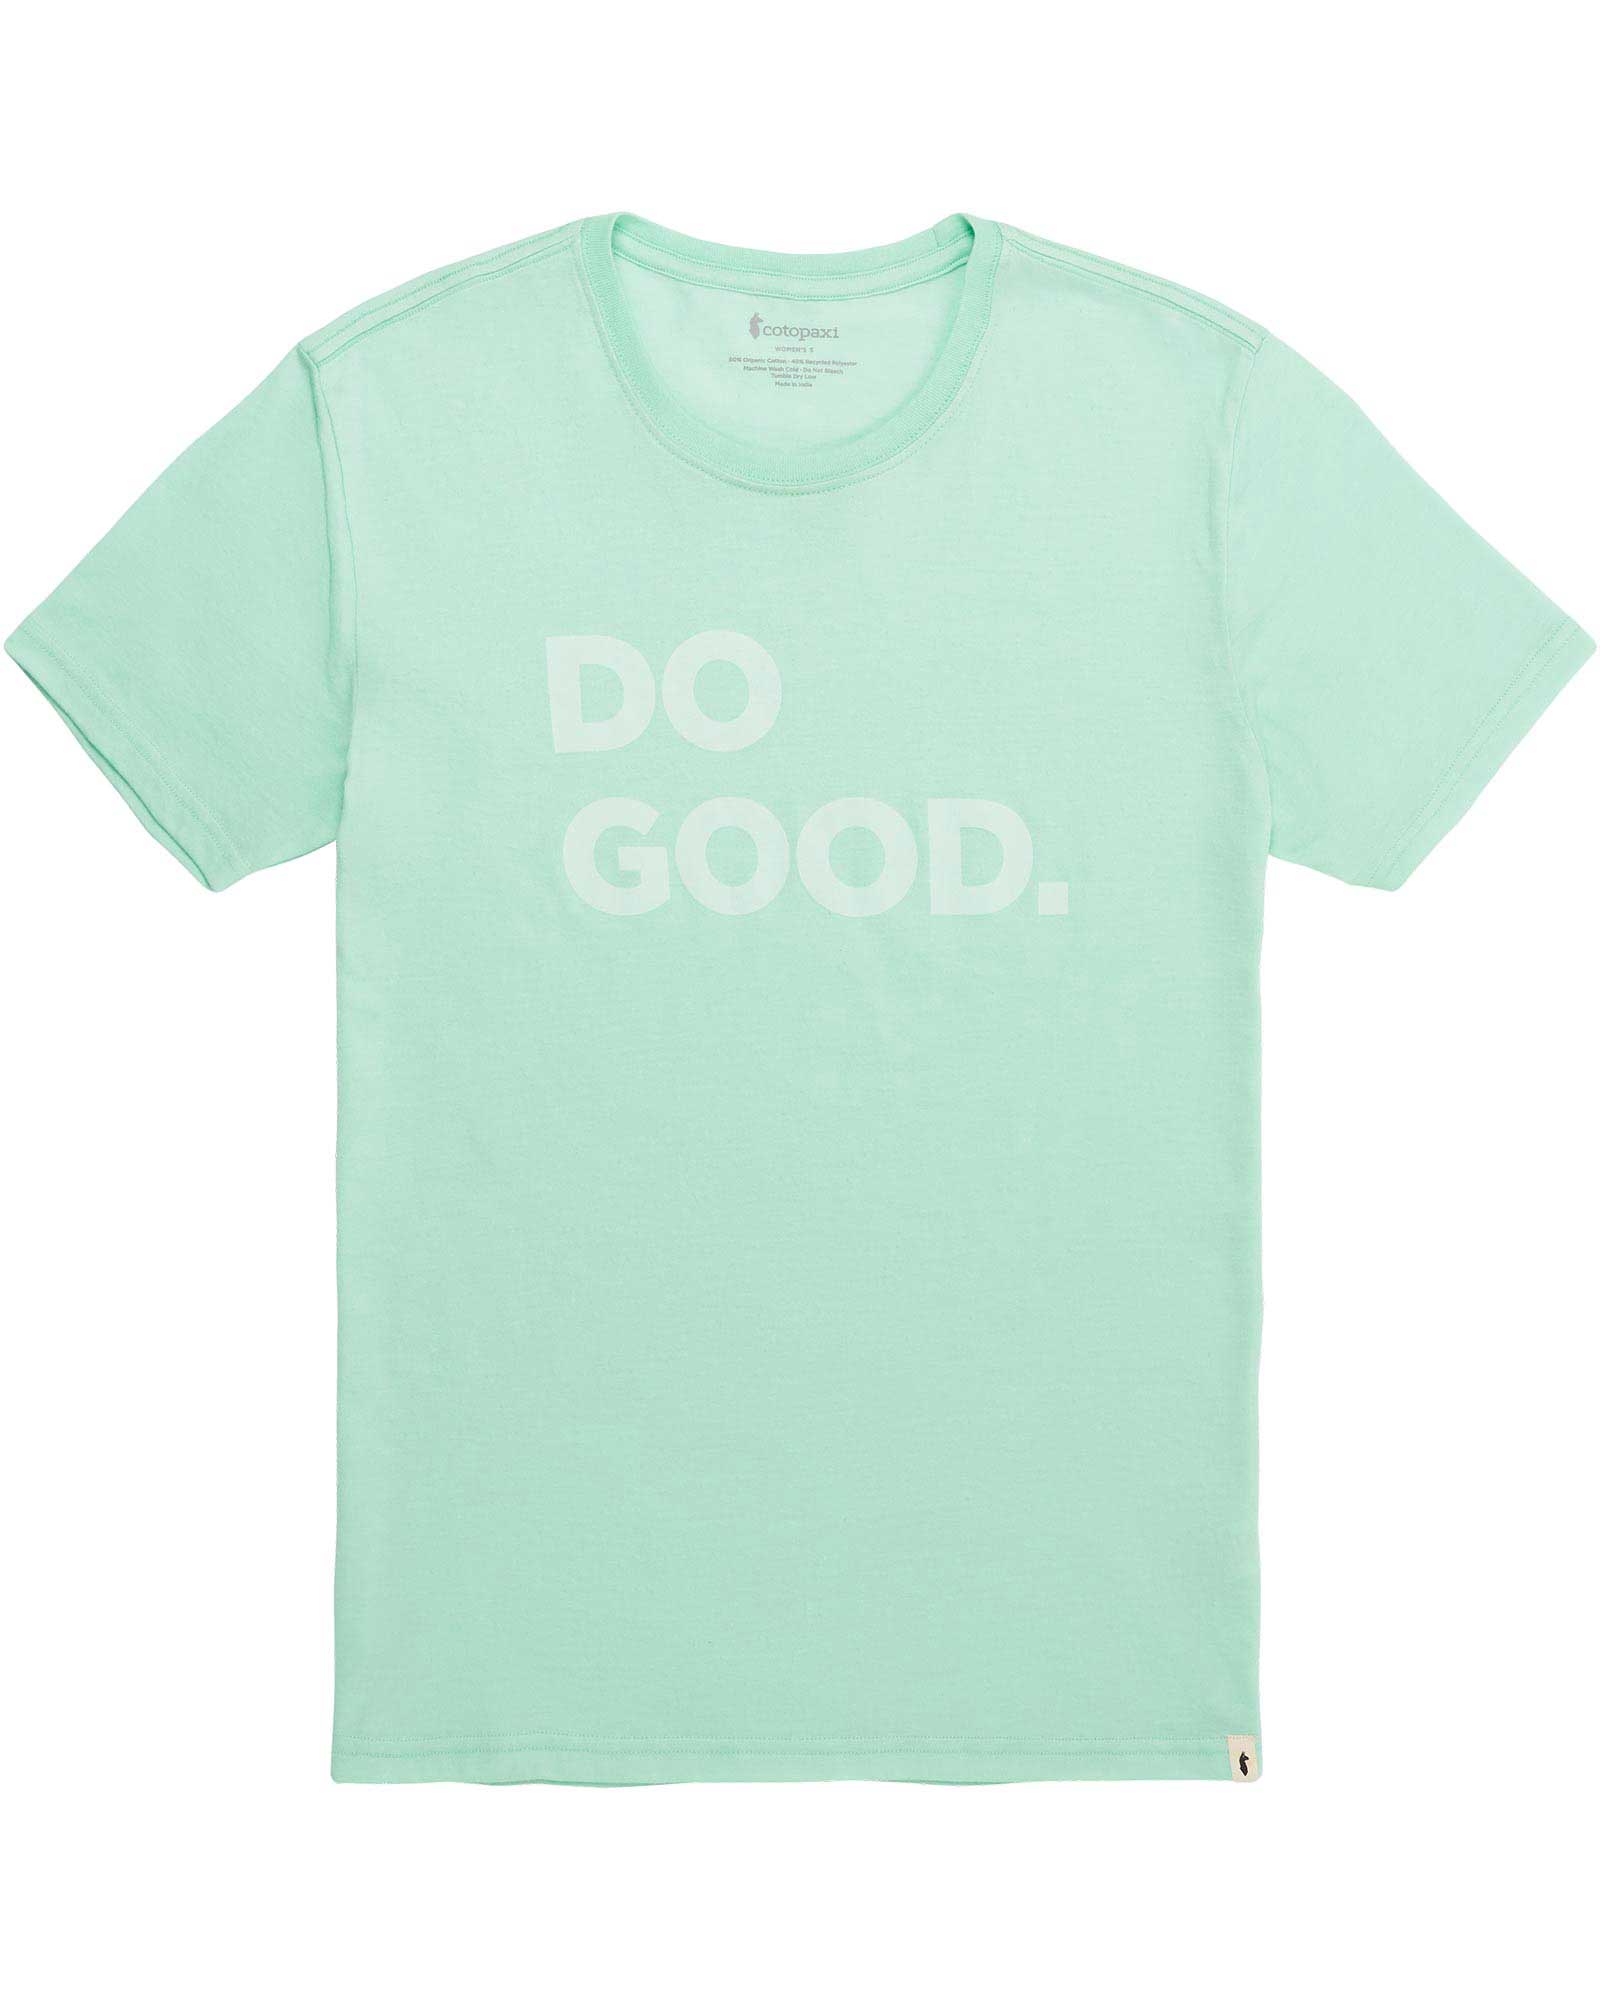 Product image of Cotopaxi Do Good Women's T-Shirt